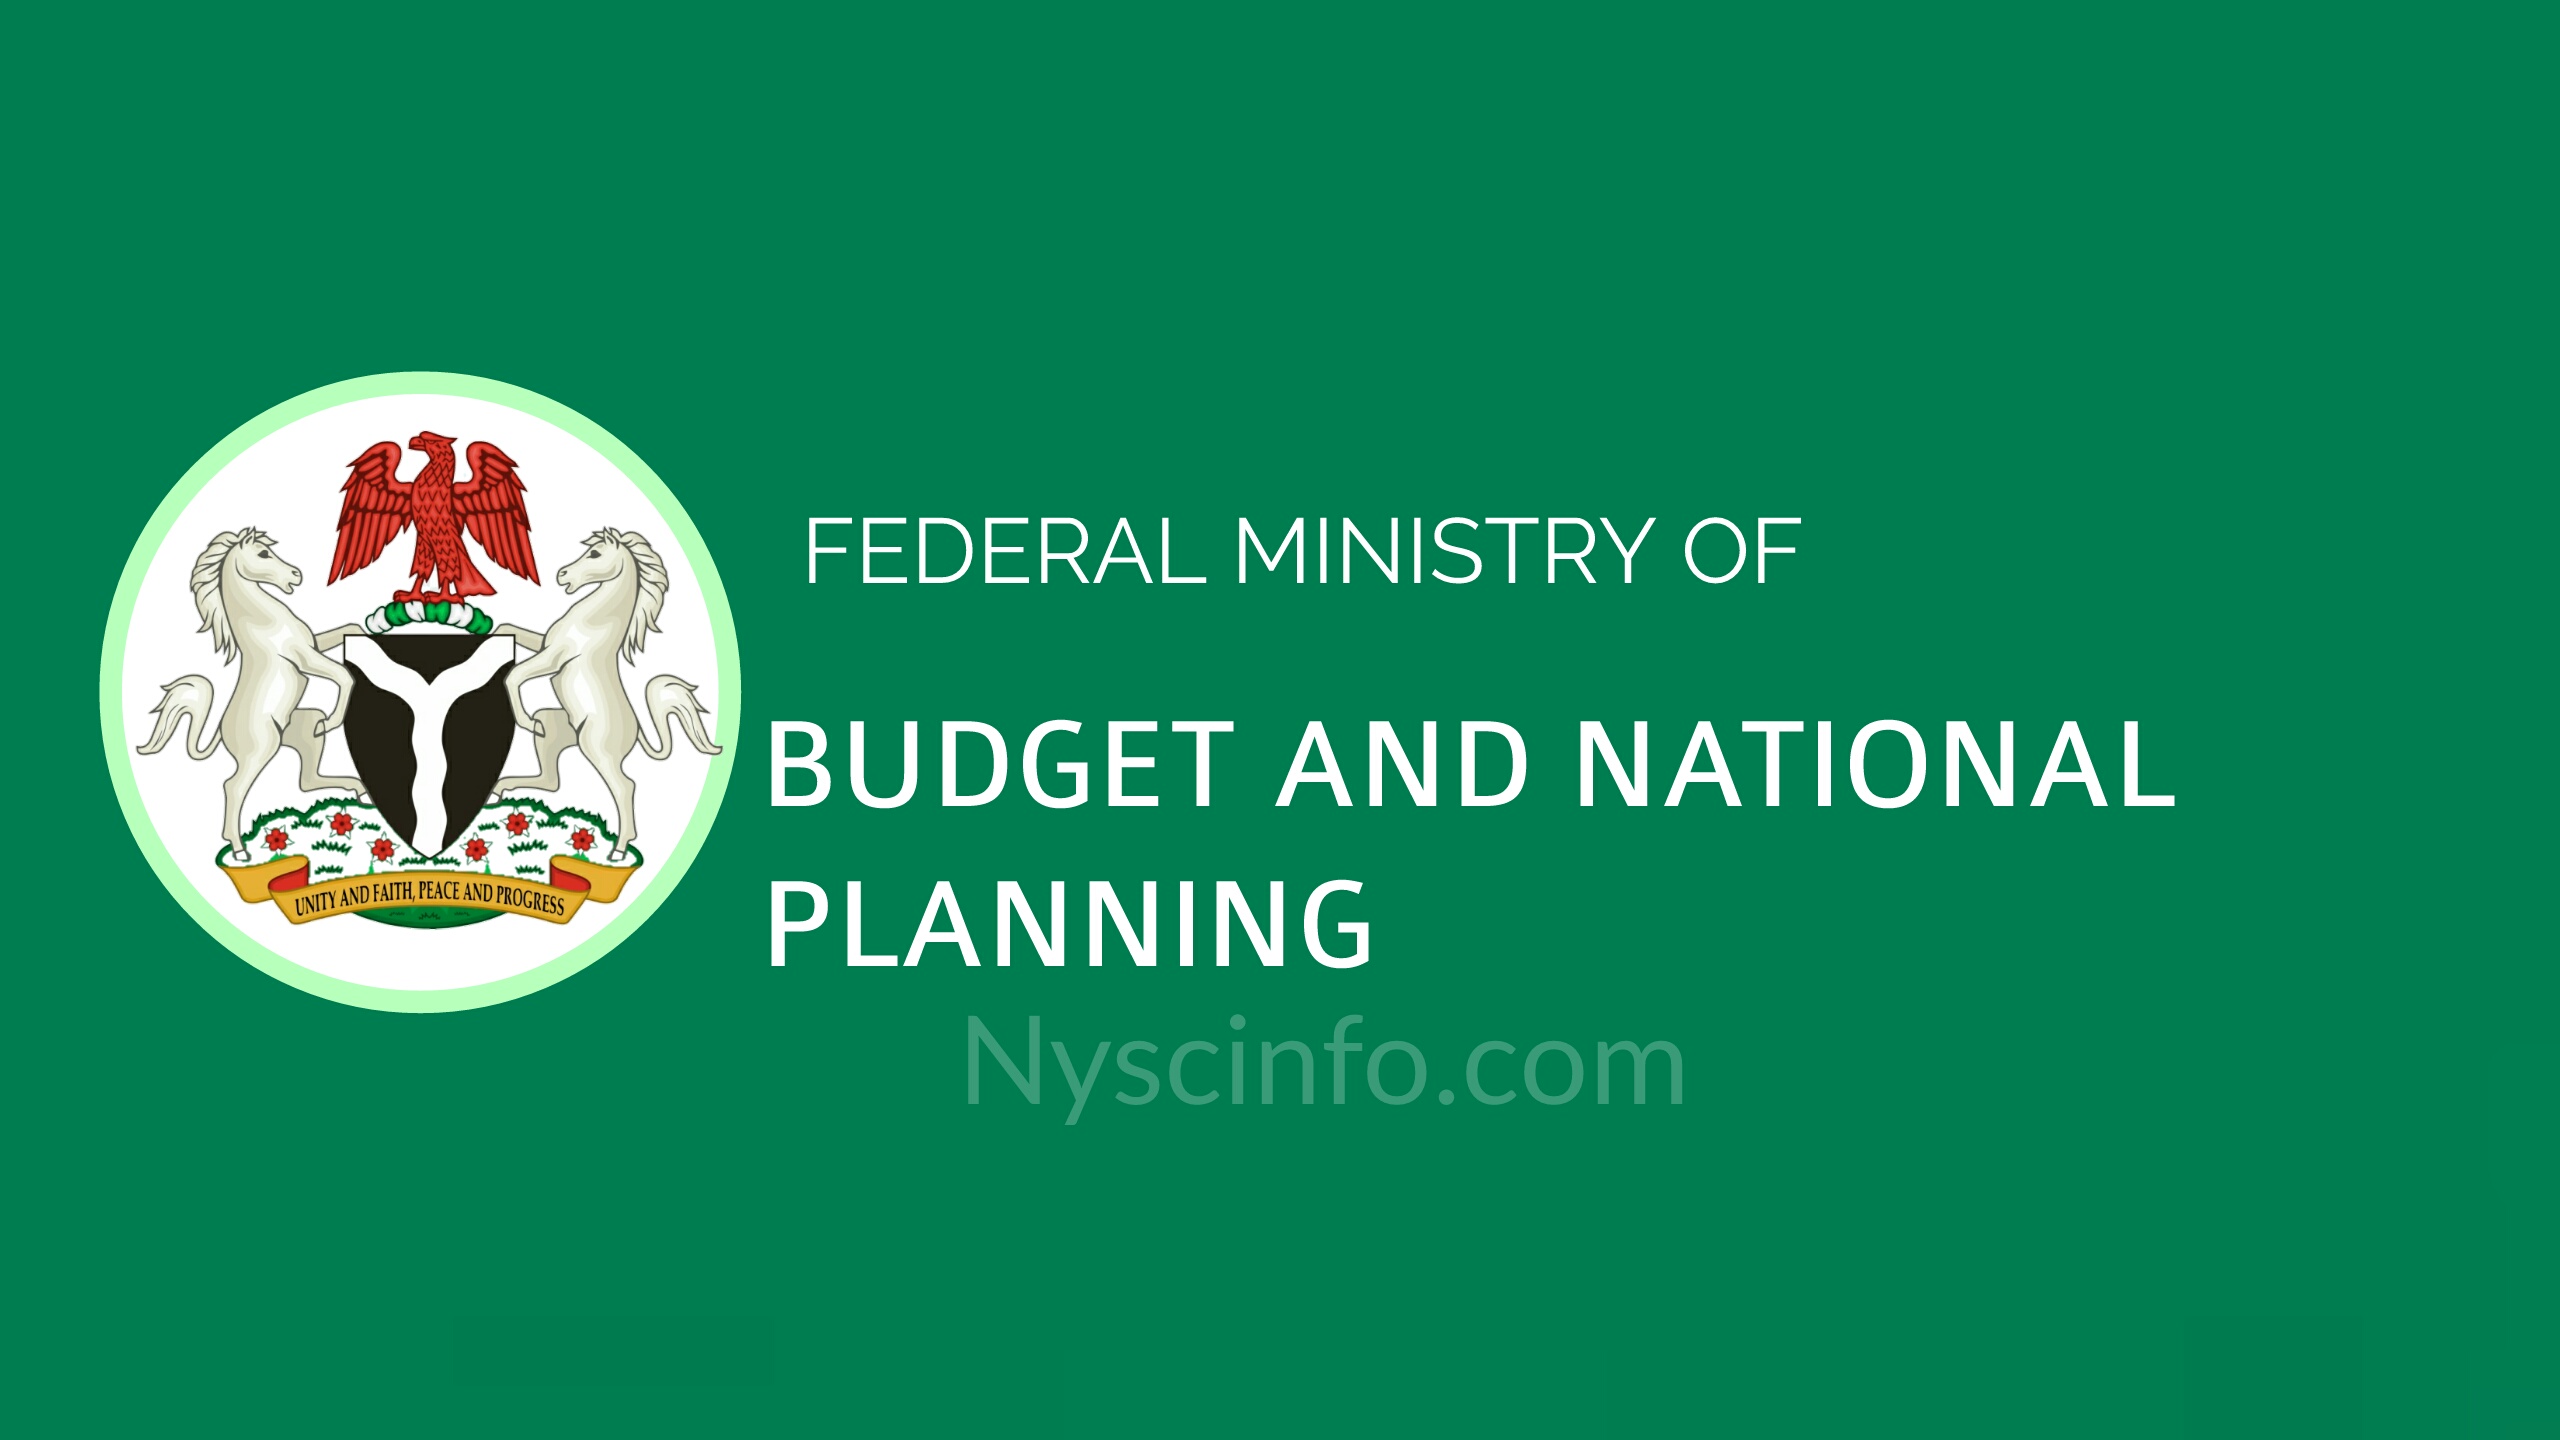 Federal Ministry of Budget and National Planning Job Recruitment